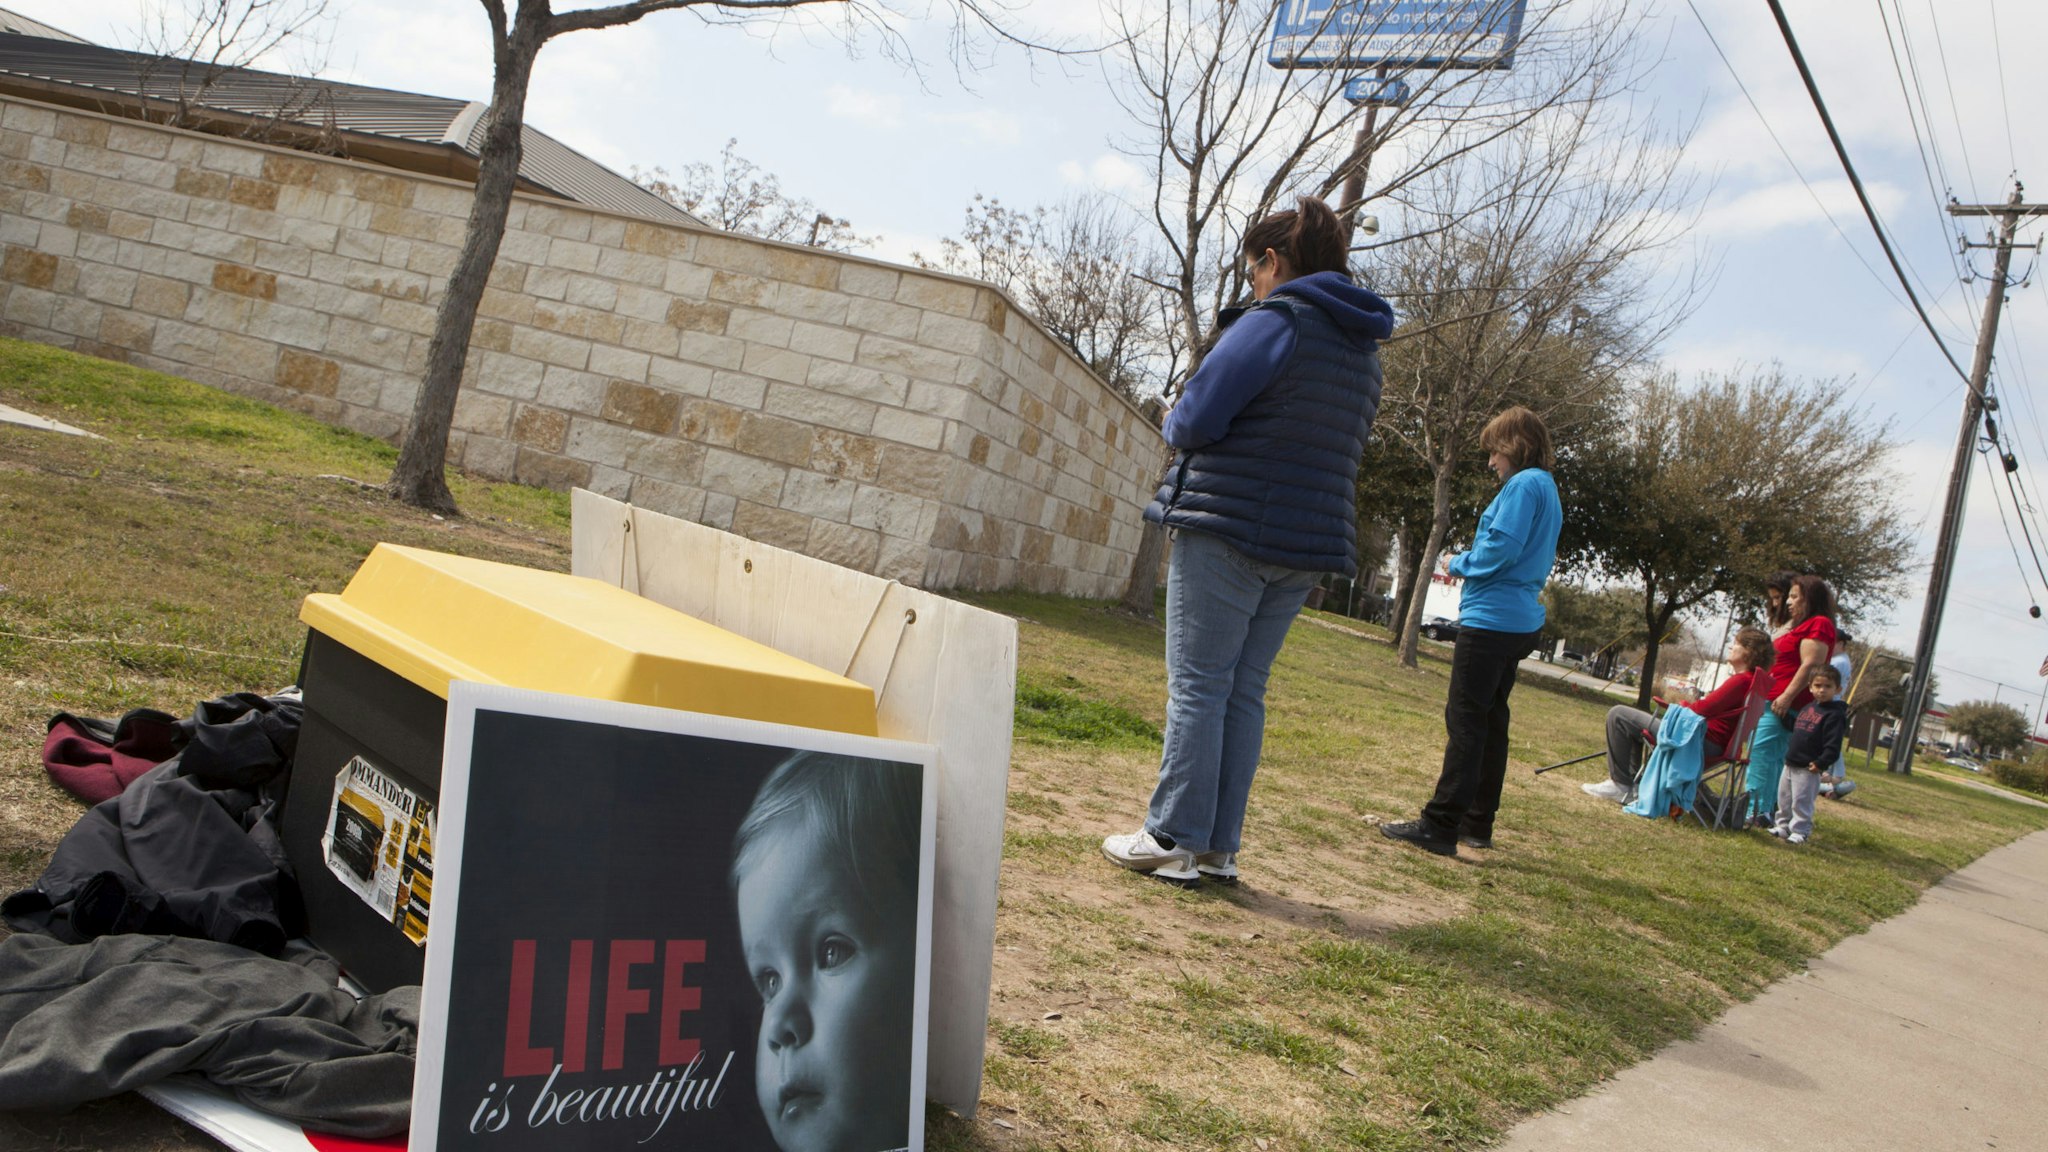 AUSTIN, TEXAS - FEBRUARY 22: Anti-abortion, pro-life activists pray outside a Planned Parenthood clinic that offers abortions, on February 22, 2016 in Austin, Texas. They sign up to pray at the vigil for one hour each in support of a campaign called 'Forty Days for Life.' At least two people will be at the vigil for forty days during daylight hours. After the passage of a restrictive abortion bill in the Texas legislature, HB2, both sides of the abortion debate are active in getting their positions known. The US Supreme Court will rule on whether to overturn the bill. (Photo by Melanie Stetson Freeman/The Christian Science Monitor via Getty Images)